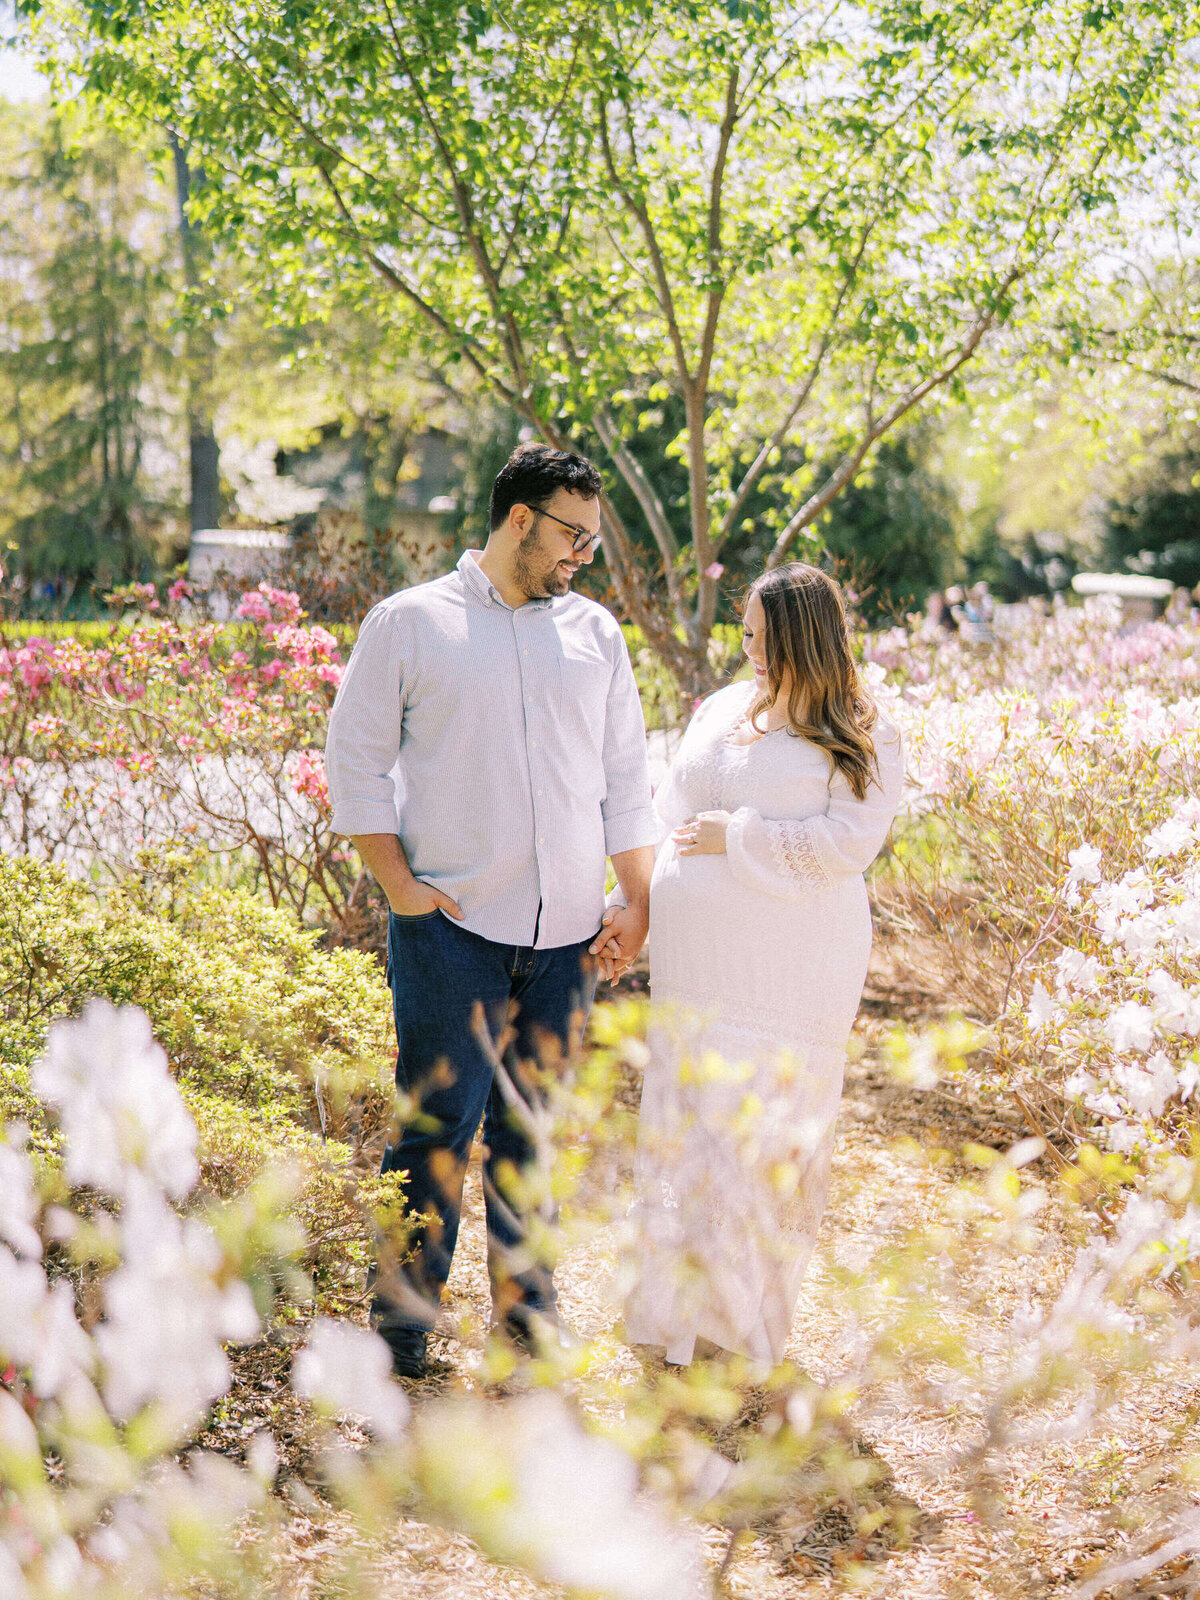 01 Dallas Arboretum Maternity Family Session Kate Panza Photography Kim and Nic